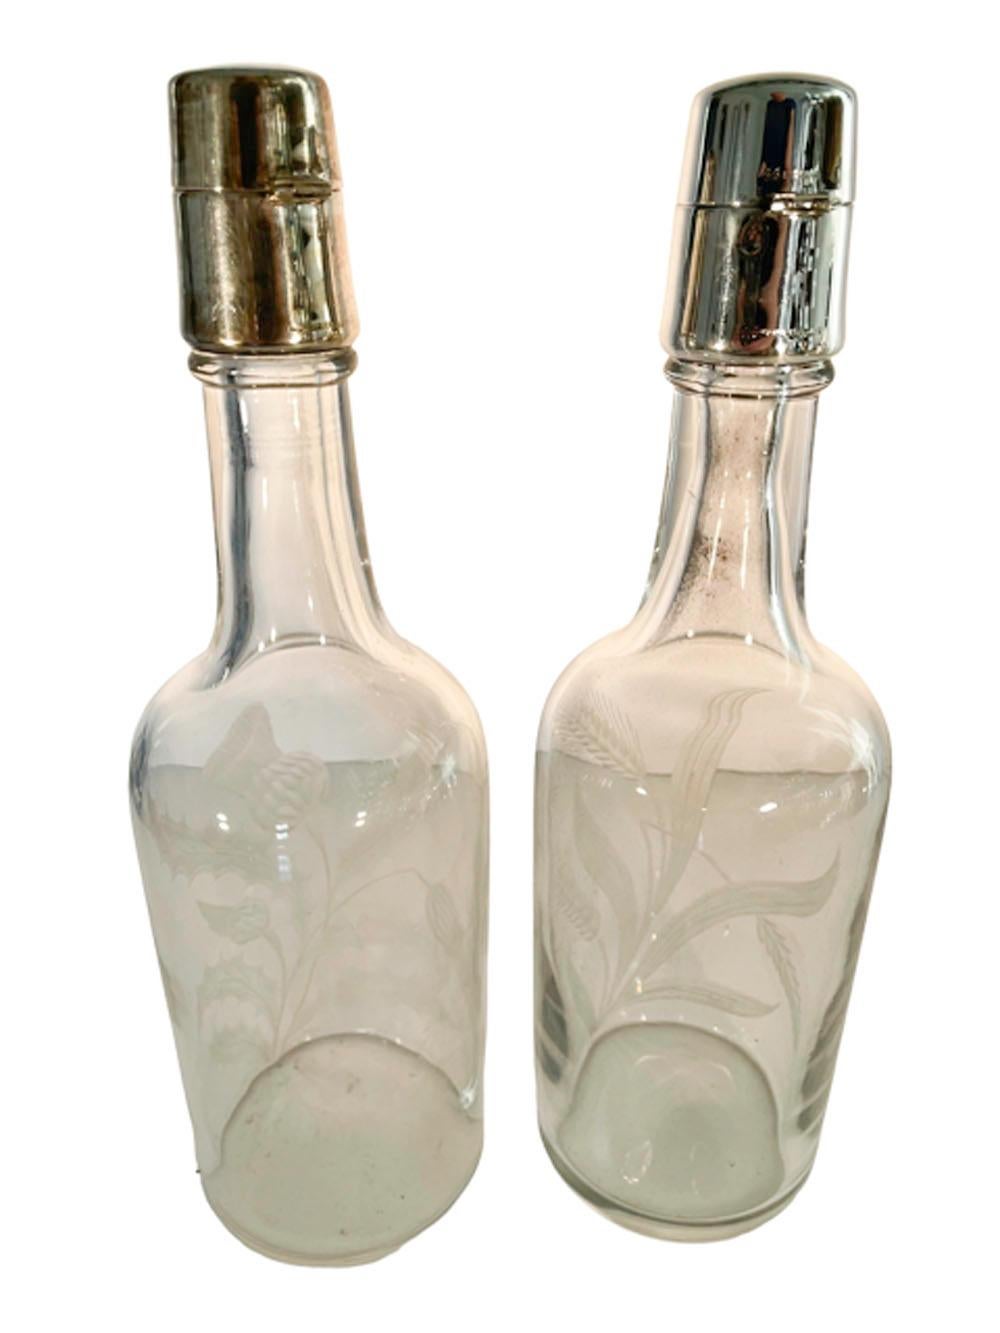 A pair of early twentieth century liquor bottles with sterling silver locking hinged caps over glass stoppers, complete with silver plate padlocks and keys, the keys have chains attaching them to their lock. The bottles are etched, one with thistles